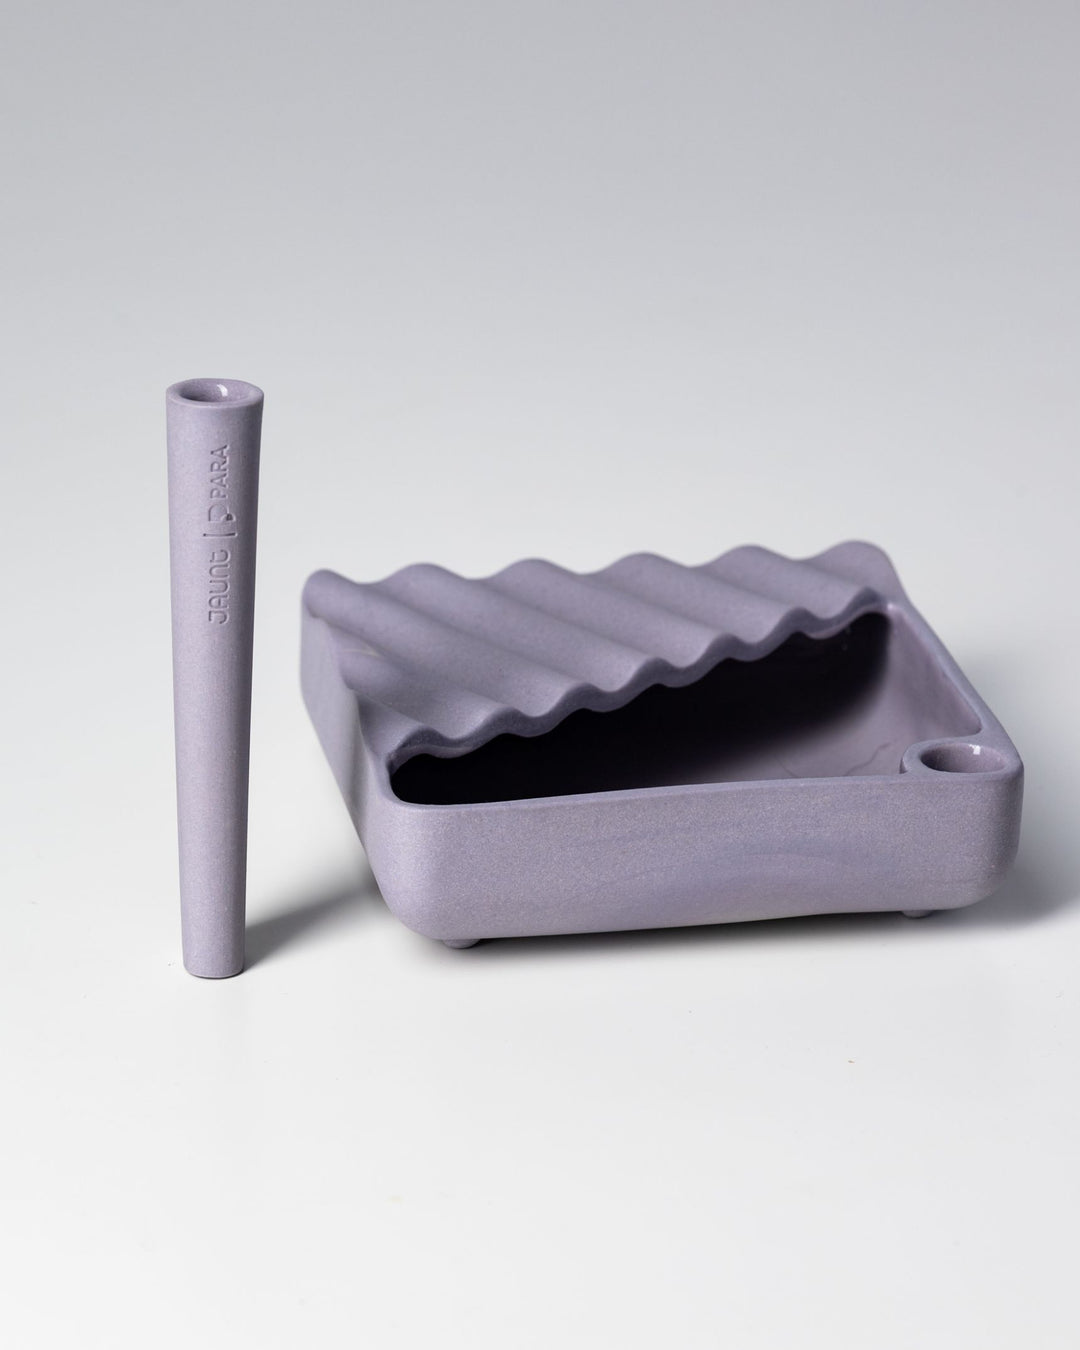 Lidded ceramic ashtray with half lid, corner joint snuffer, and matching ceramic one-hitter.